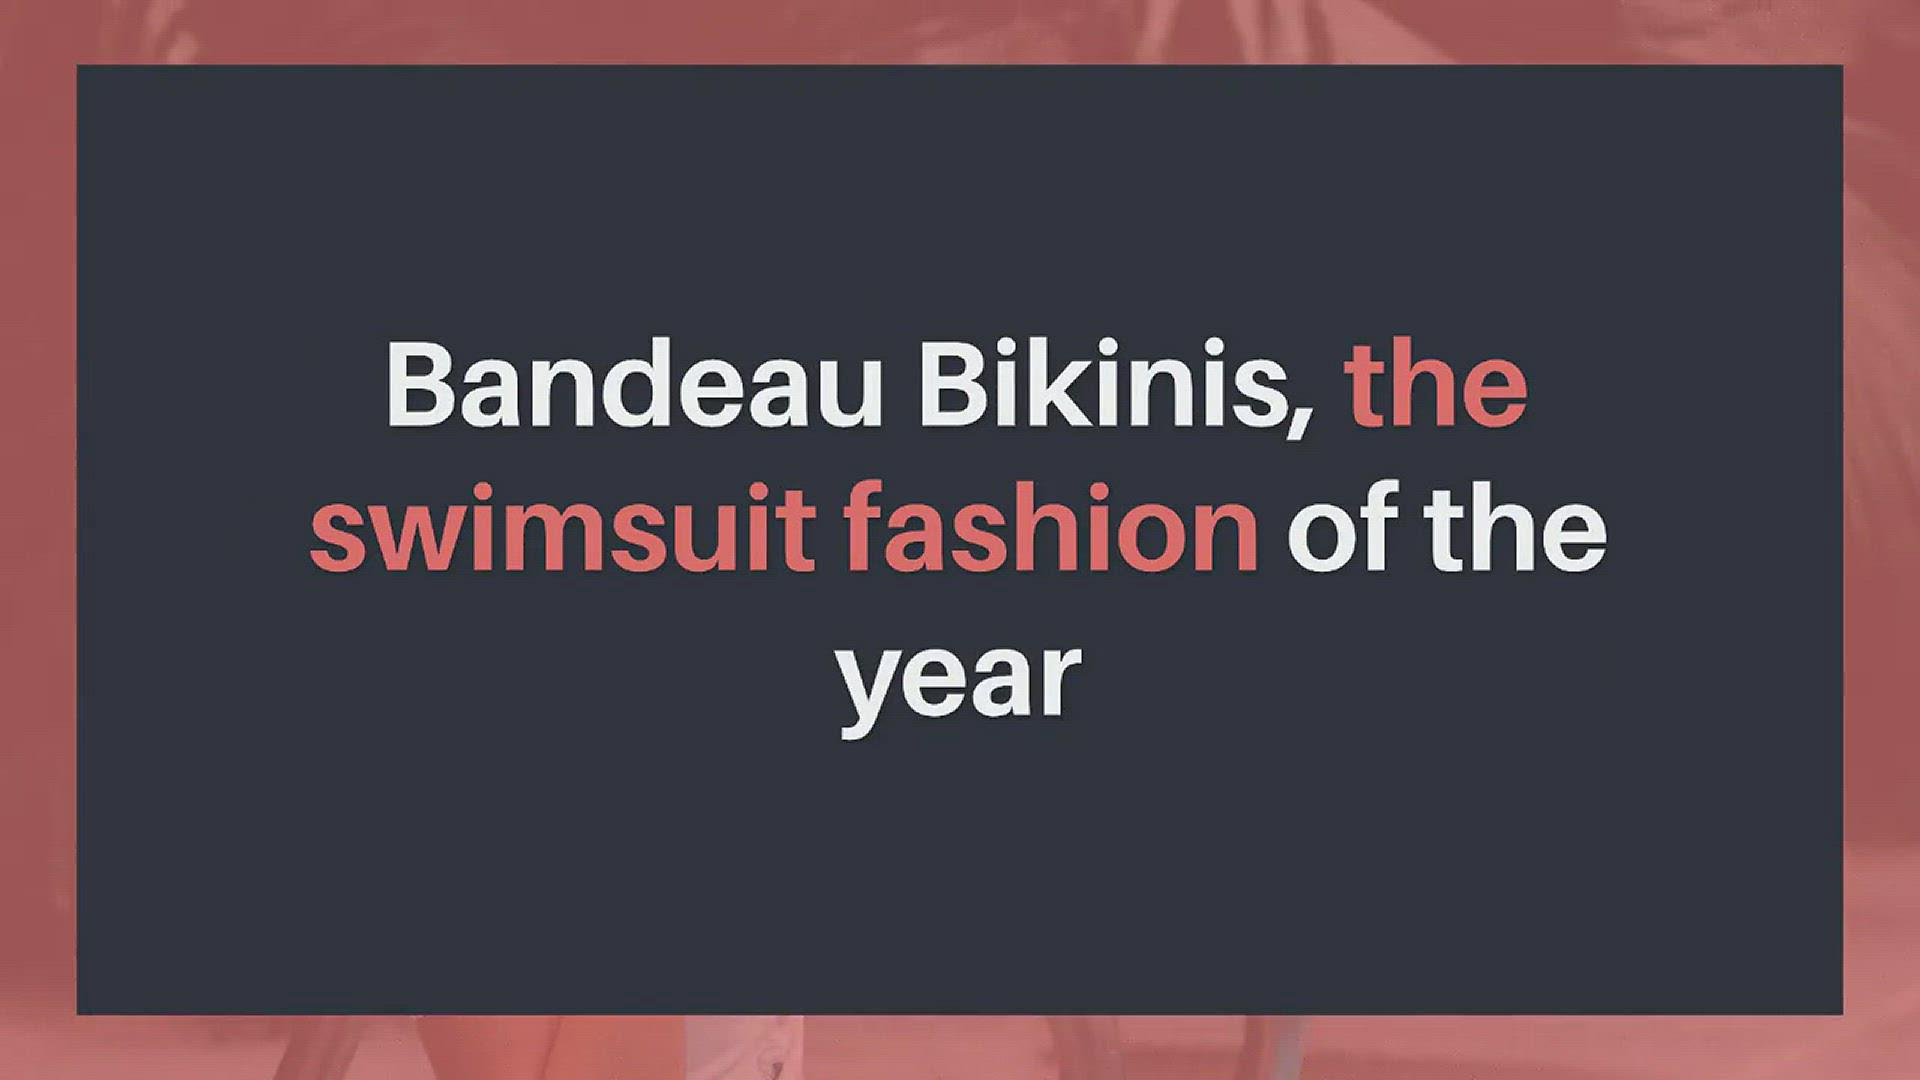 'Video thumbnail for Bandeau Bikinis, the swimsuit fashion of the year'